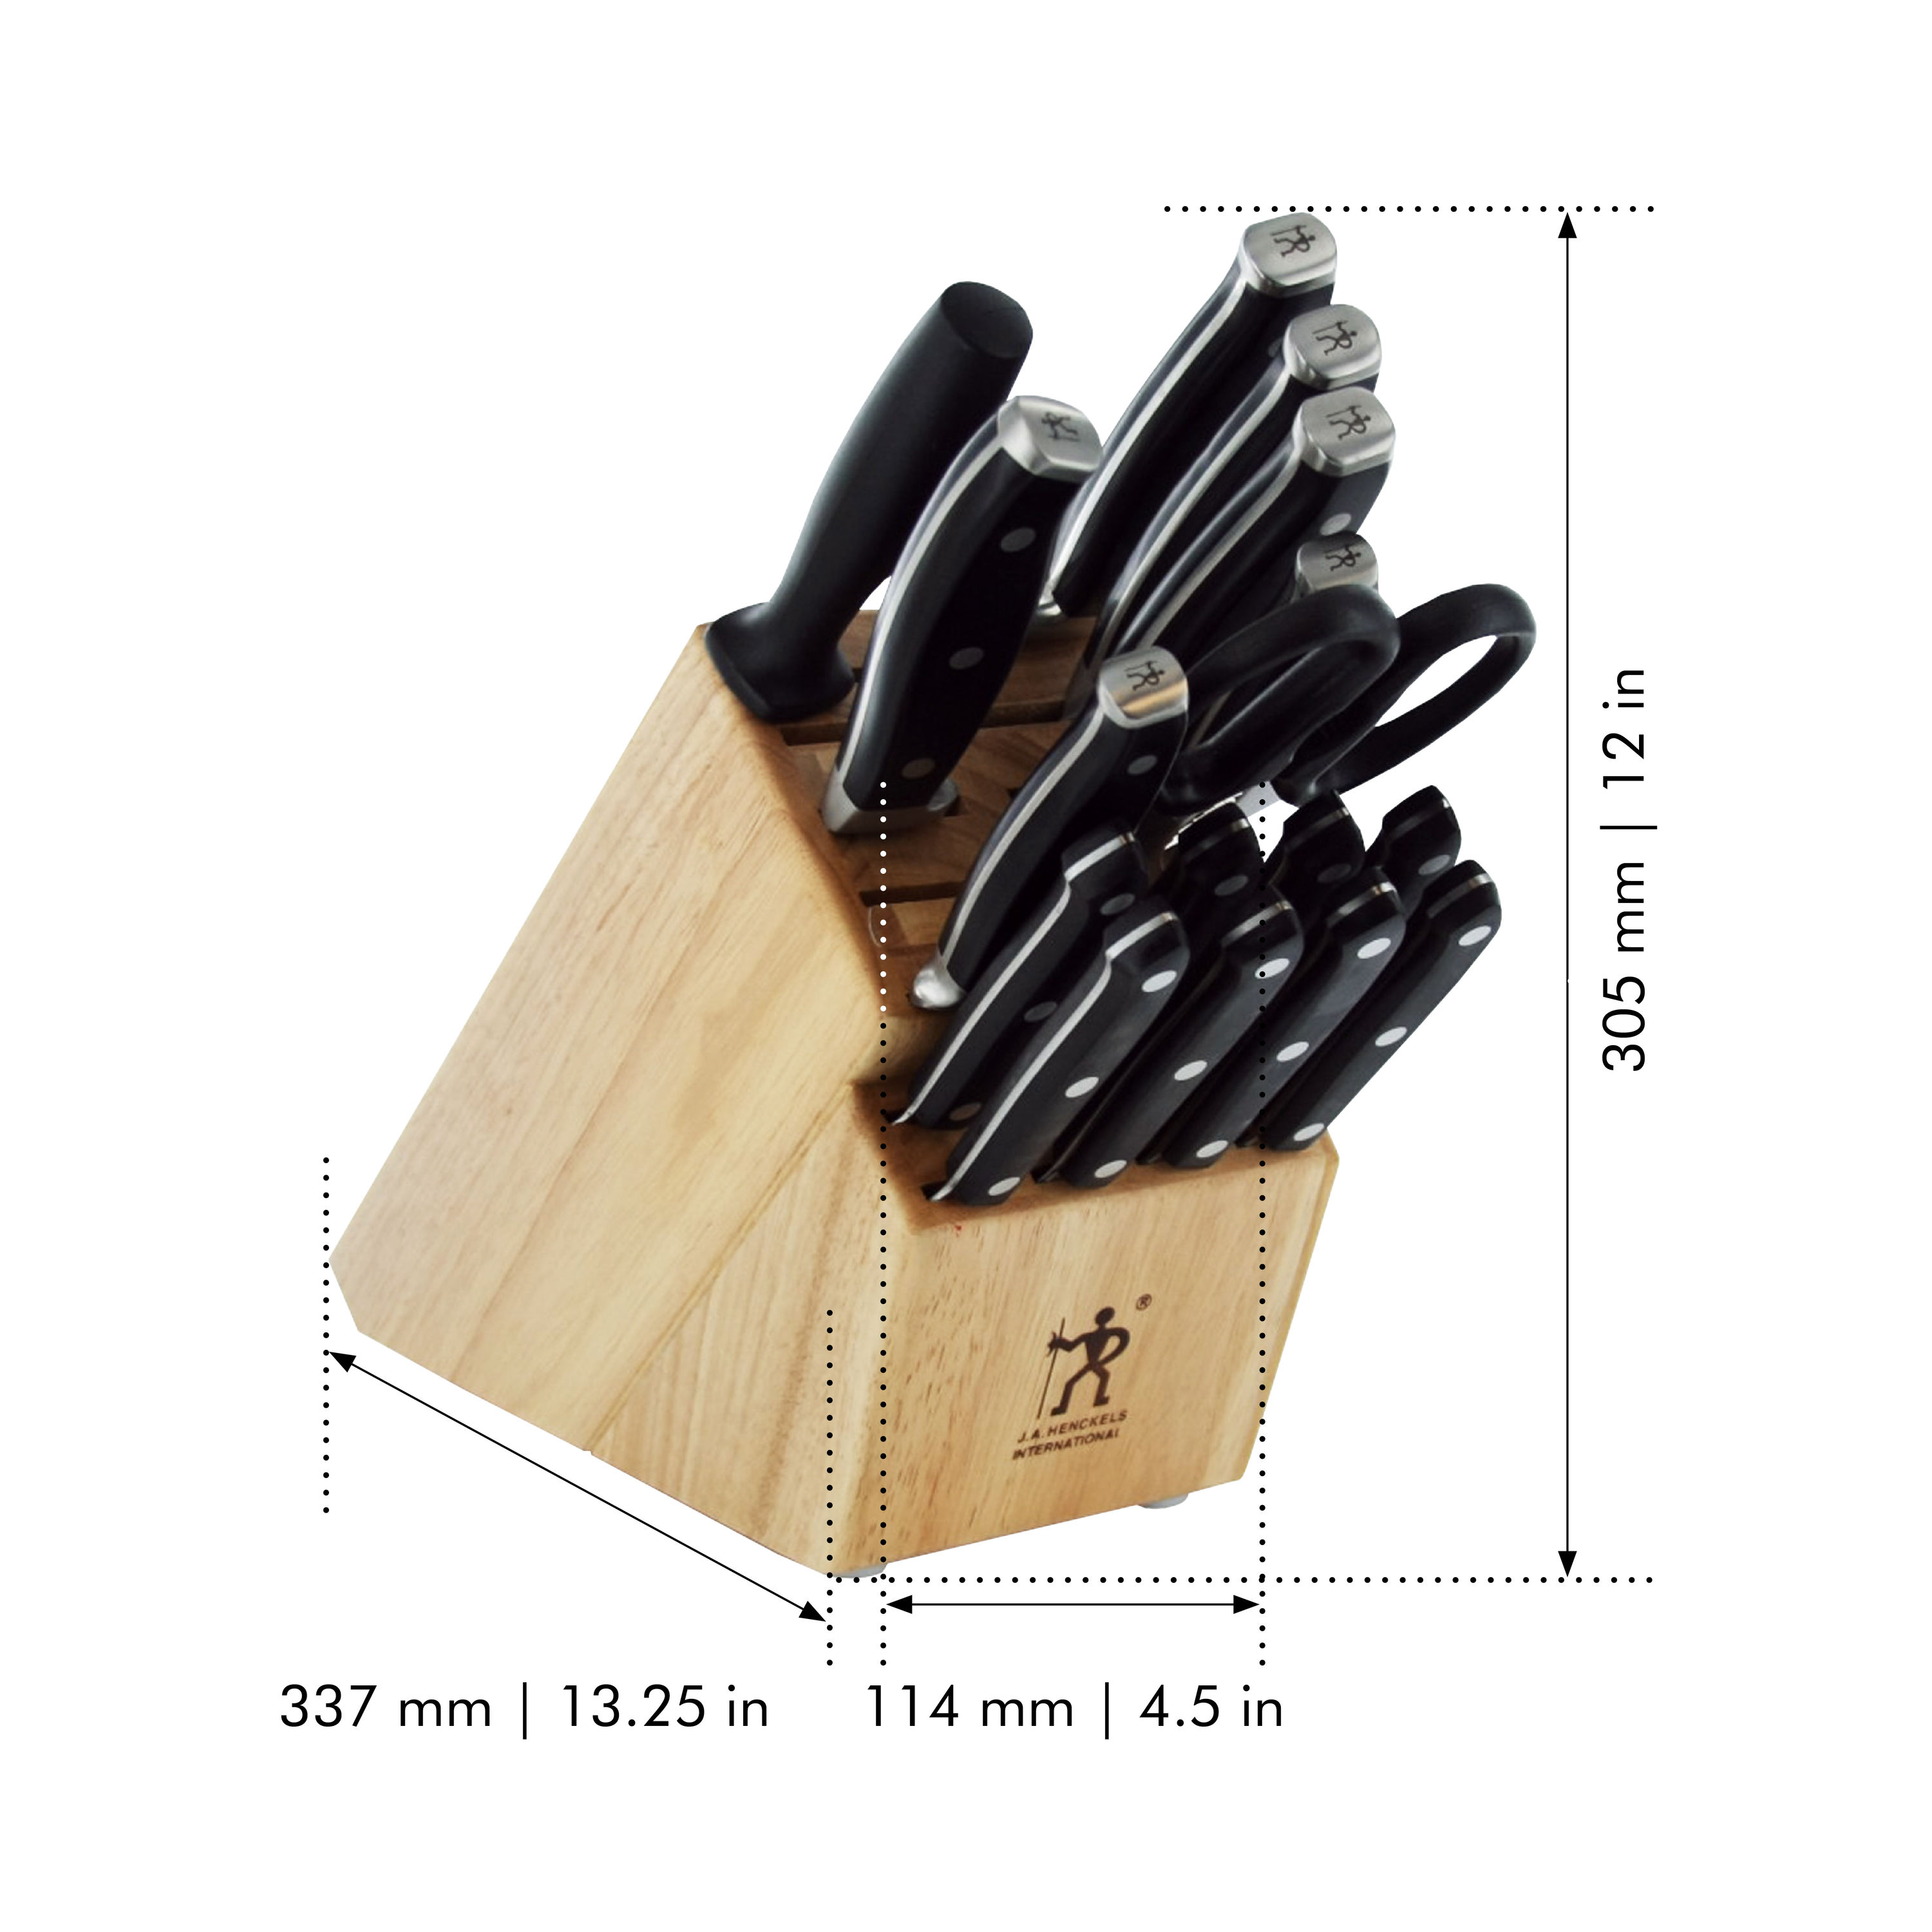 ZWILLING Now S Knife Block Set, 6-pc, Lime Green